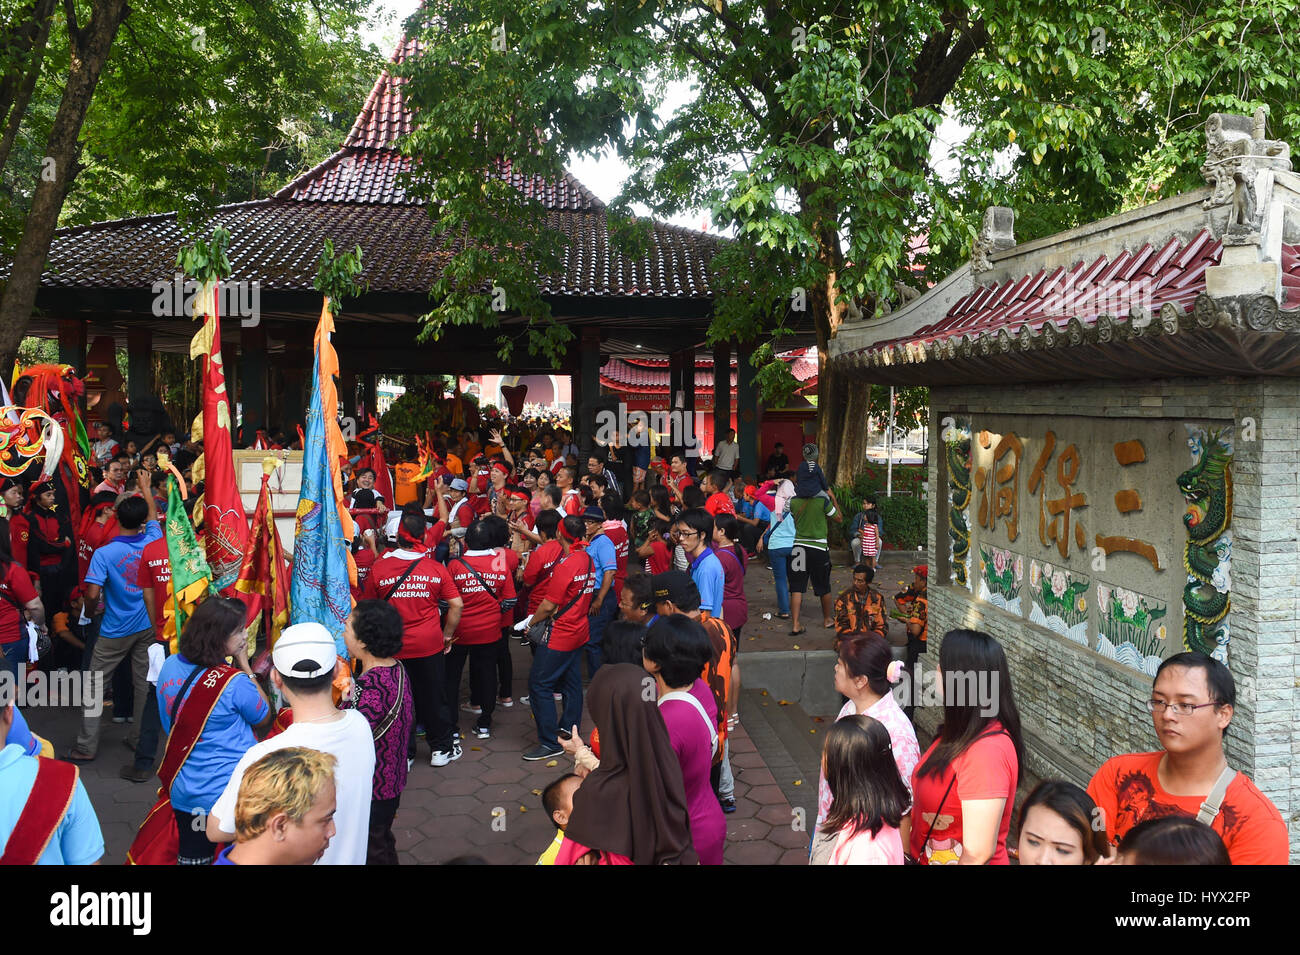 (170407) -- SEMARANG(INDONESIA), April 7, 2017 (Xinhua) -- Photo taken on July 31, 2016 shows a ceremony to commemorate the Chinese Ming Dynasty (1368-1644) navigator Zheng He's arrival at Semarang at the Sam Poo Kong Temple in Semarang, Indonesia. Chinese navy explorer Zheng He who visited the Central Java Province's port city of Semarang 600 years ago has an enduring legacy in the capital of the province. Arriving here at the beginning of the 15th century, Zheng He made a cave on the Simongan Hill as his temporary abode and repaired his ships. During his stay, Zheng He built a mosque and set Stock Photo